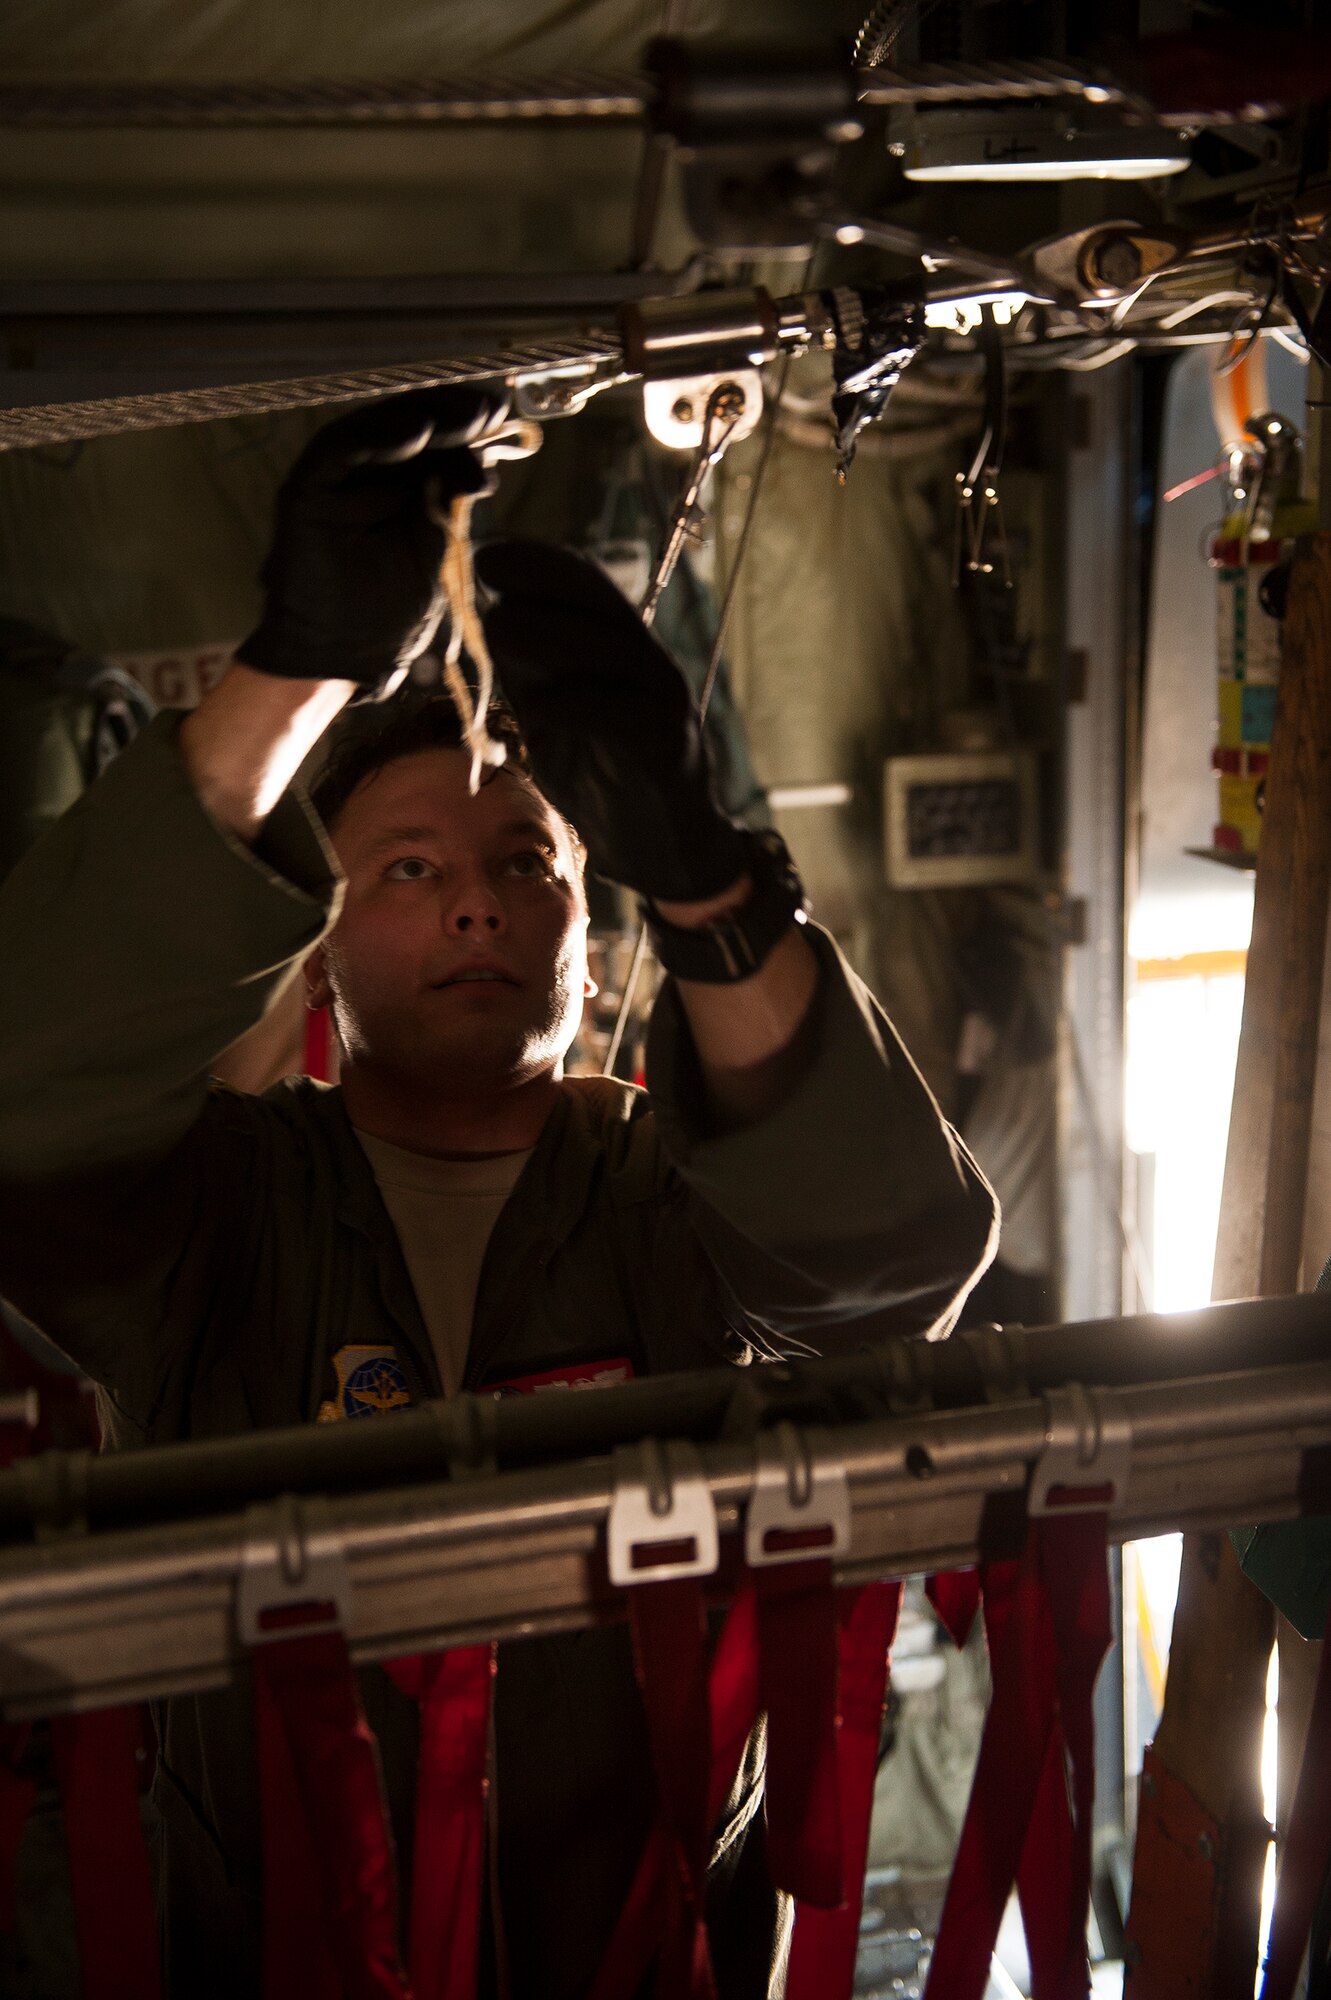 U.S. Air Force Staff Sgt. Jeremiah Lindstrom, a 50th Airlift Squadron loadmaster, secures a cable in preparation for a personnel drop Aug. 18, 2013, at Little Rock Air Force Base, Ark. Lindstrom was part of a C-130H crew participating in Joint Operational Access Exercise 13-0X, part of a multi-day combined military training exercise designed to prepare Airmen and soldiers to respond to worldwide crises and contingencies. (U.S. Air Force photo by Staff Sgt. Russ Scalf)